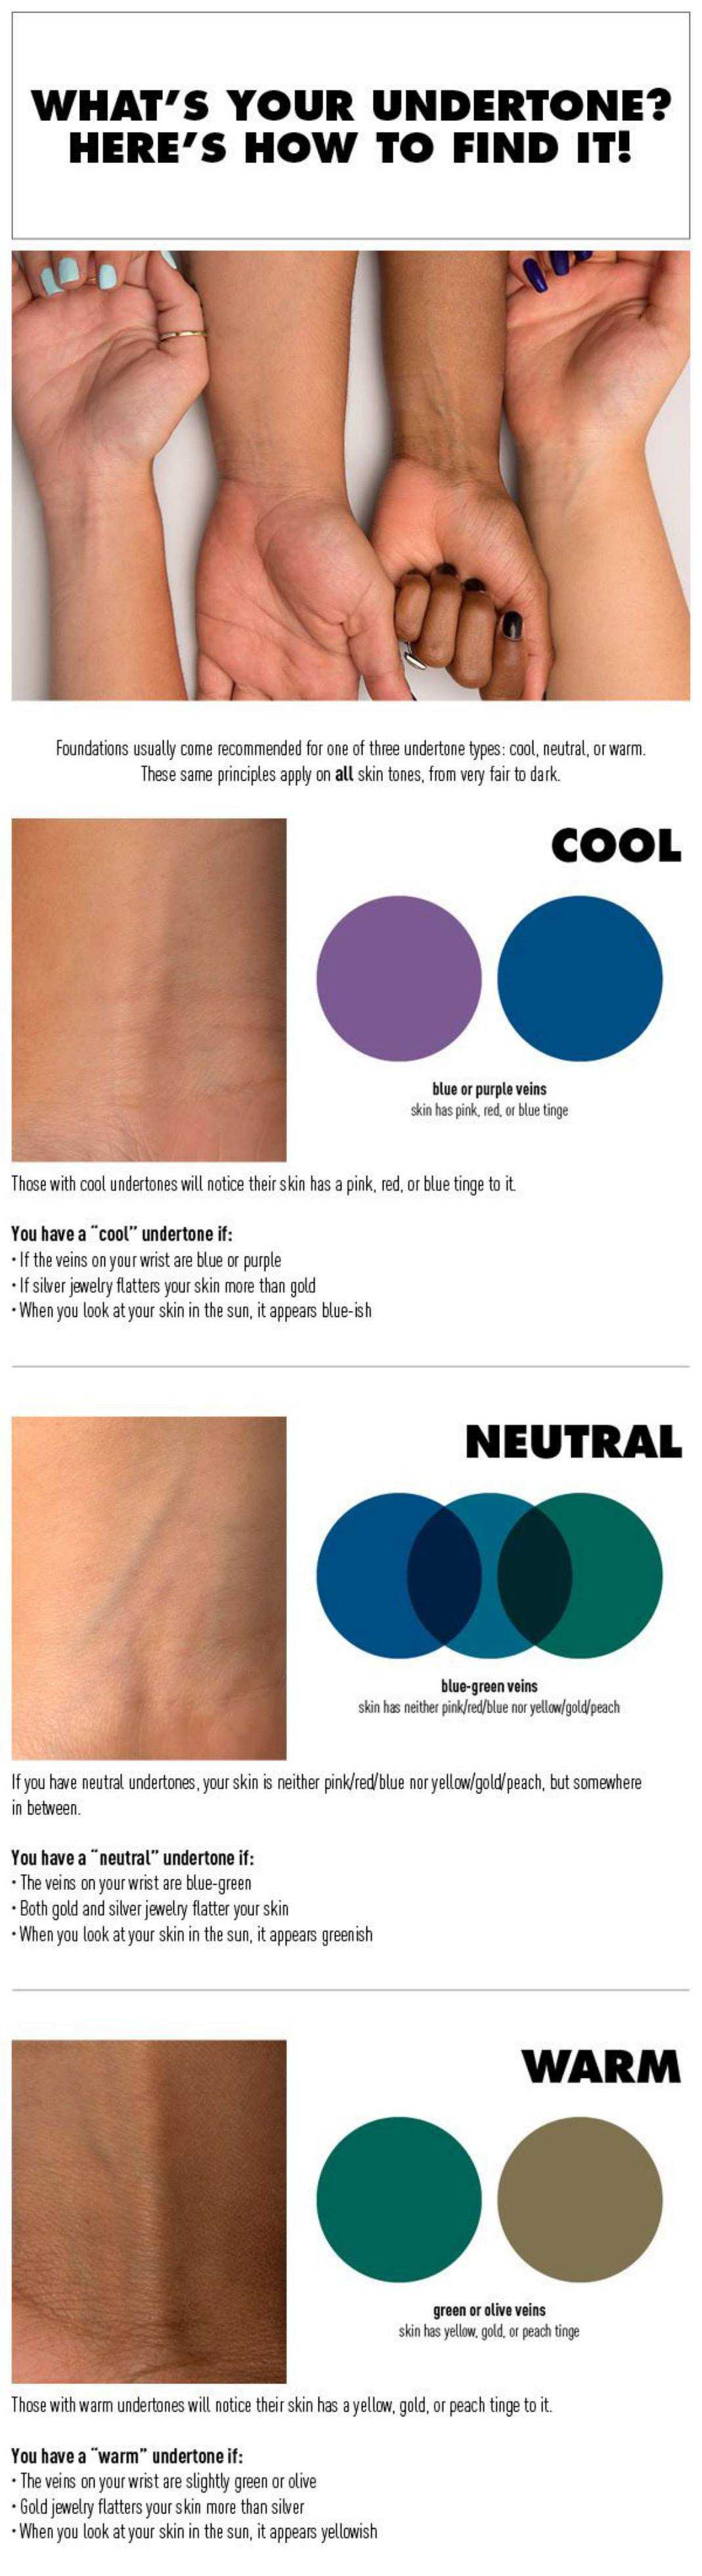 How To Find Your Undertone